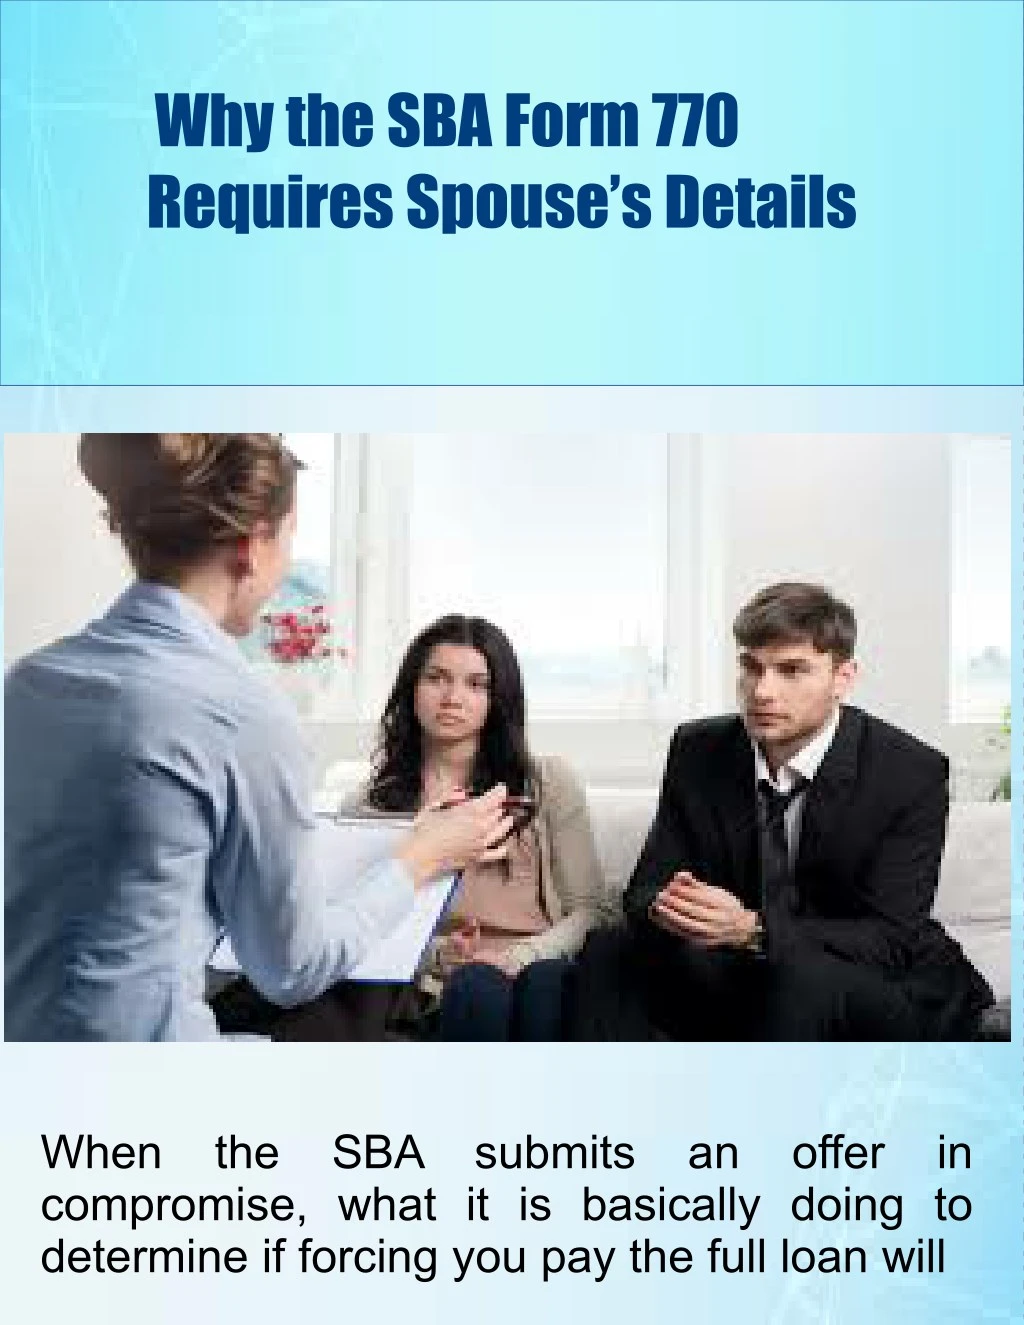 why the sba form 770 requires spouse s details